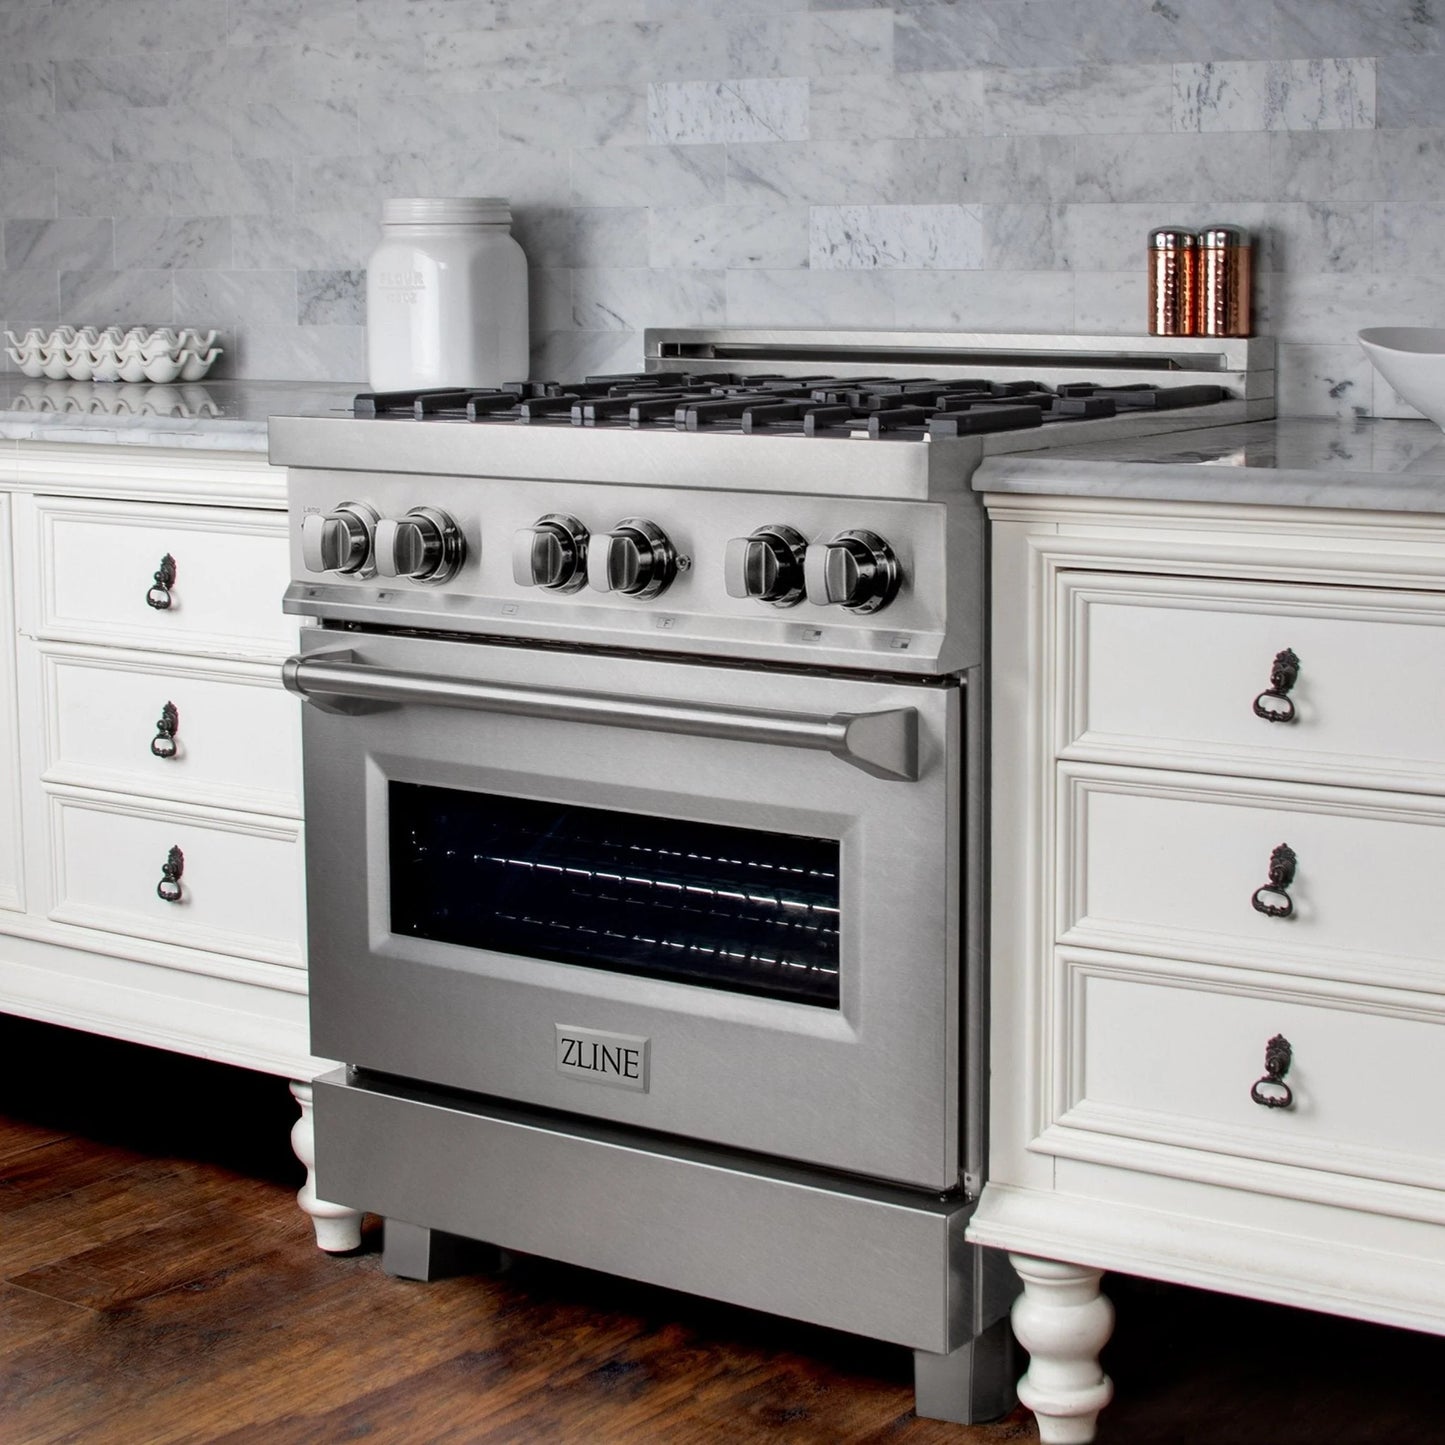 ZLINE 30 in. Dual Fuel Range with Gas Stove and Electric Oven in All Fingerprint Resistant Stainless Steel (RAS-SN-30)